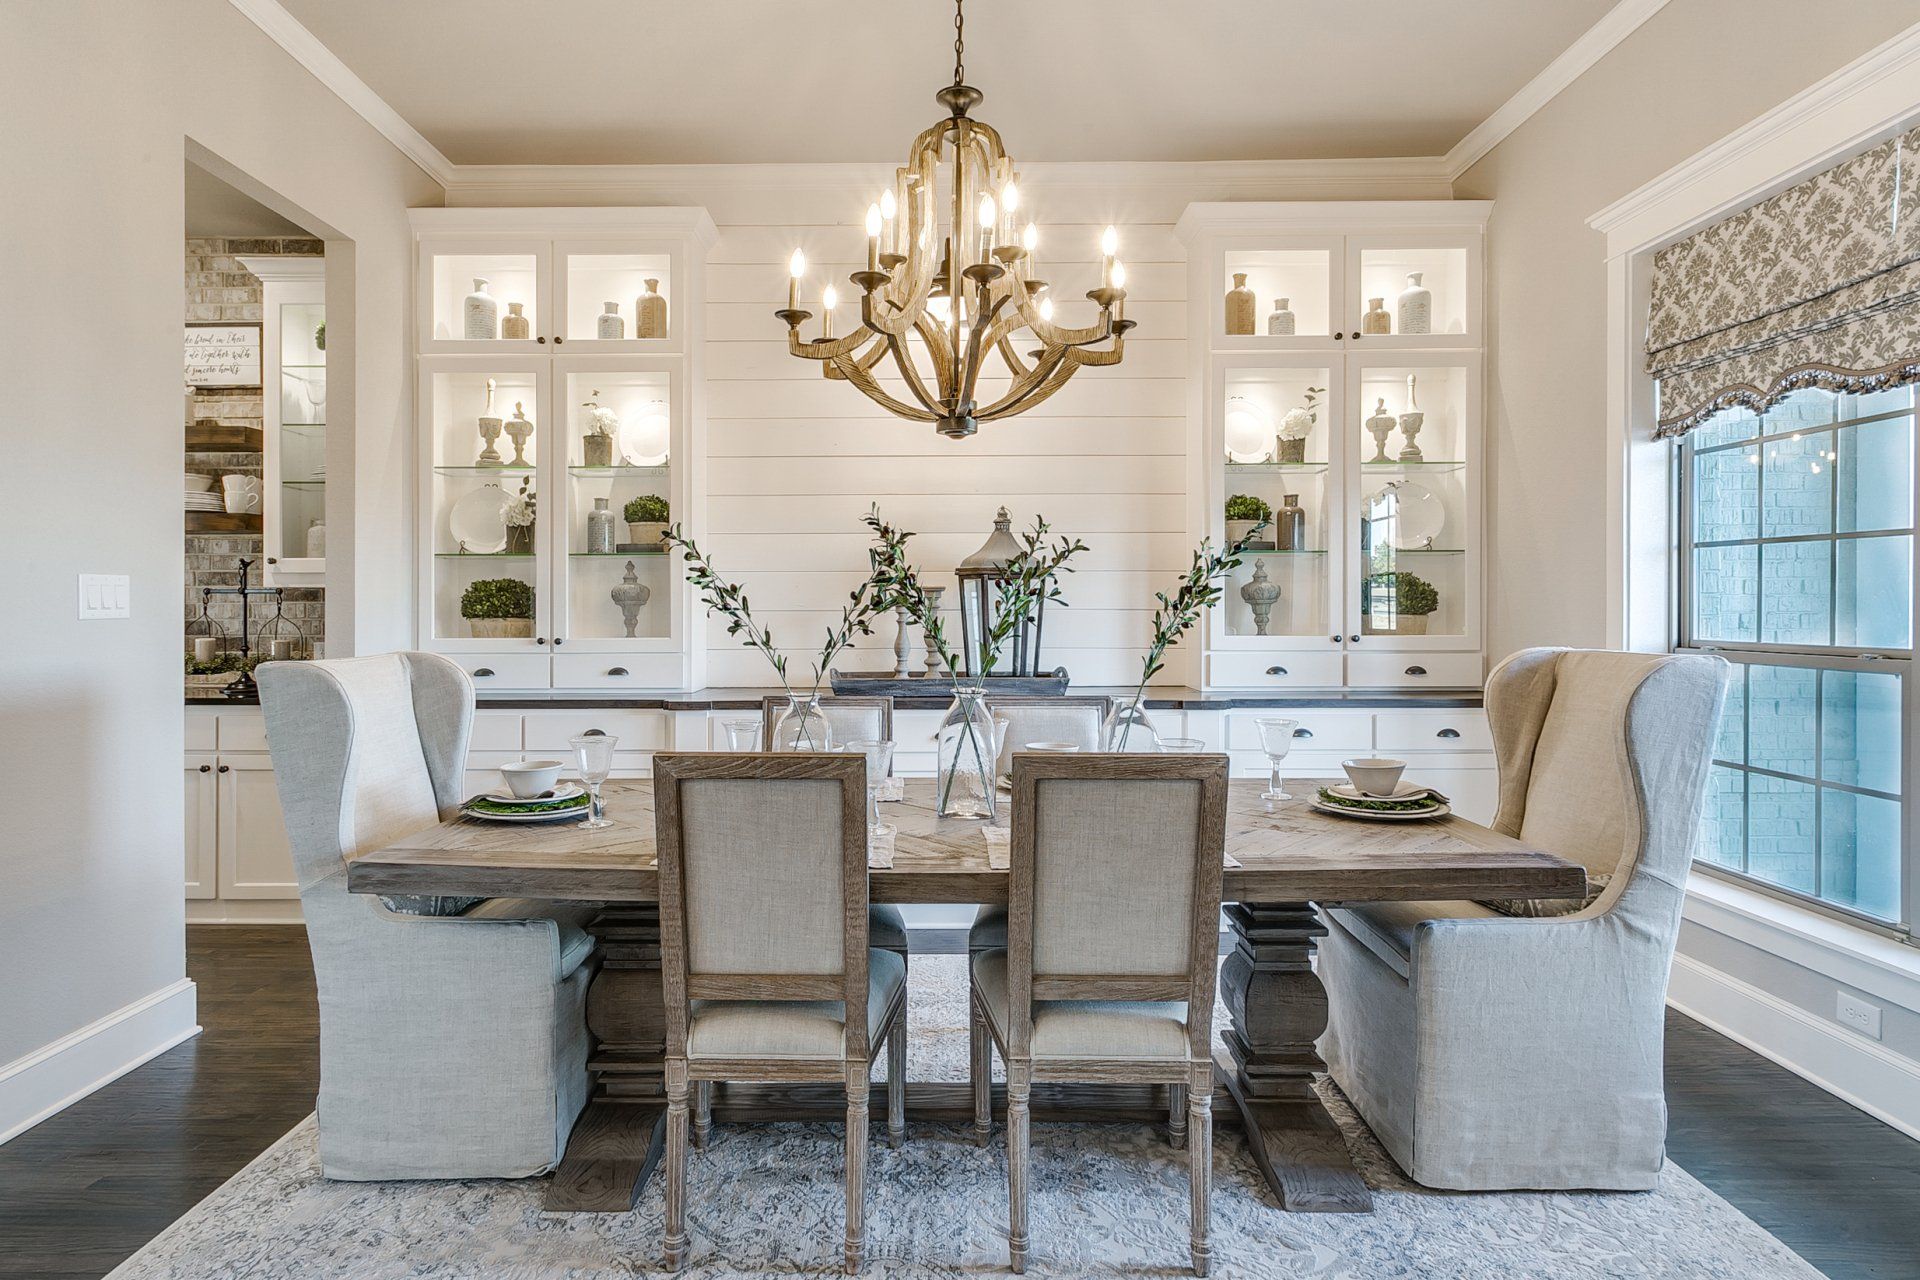 Elegant dining area | John Houston Homes | New Homes for Sale in Dallas-Fort Worth, Waco and surrounding areas.